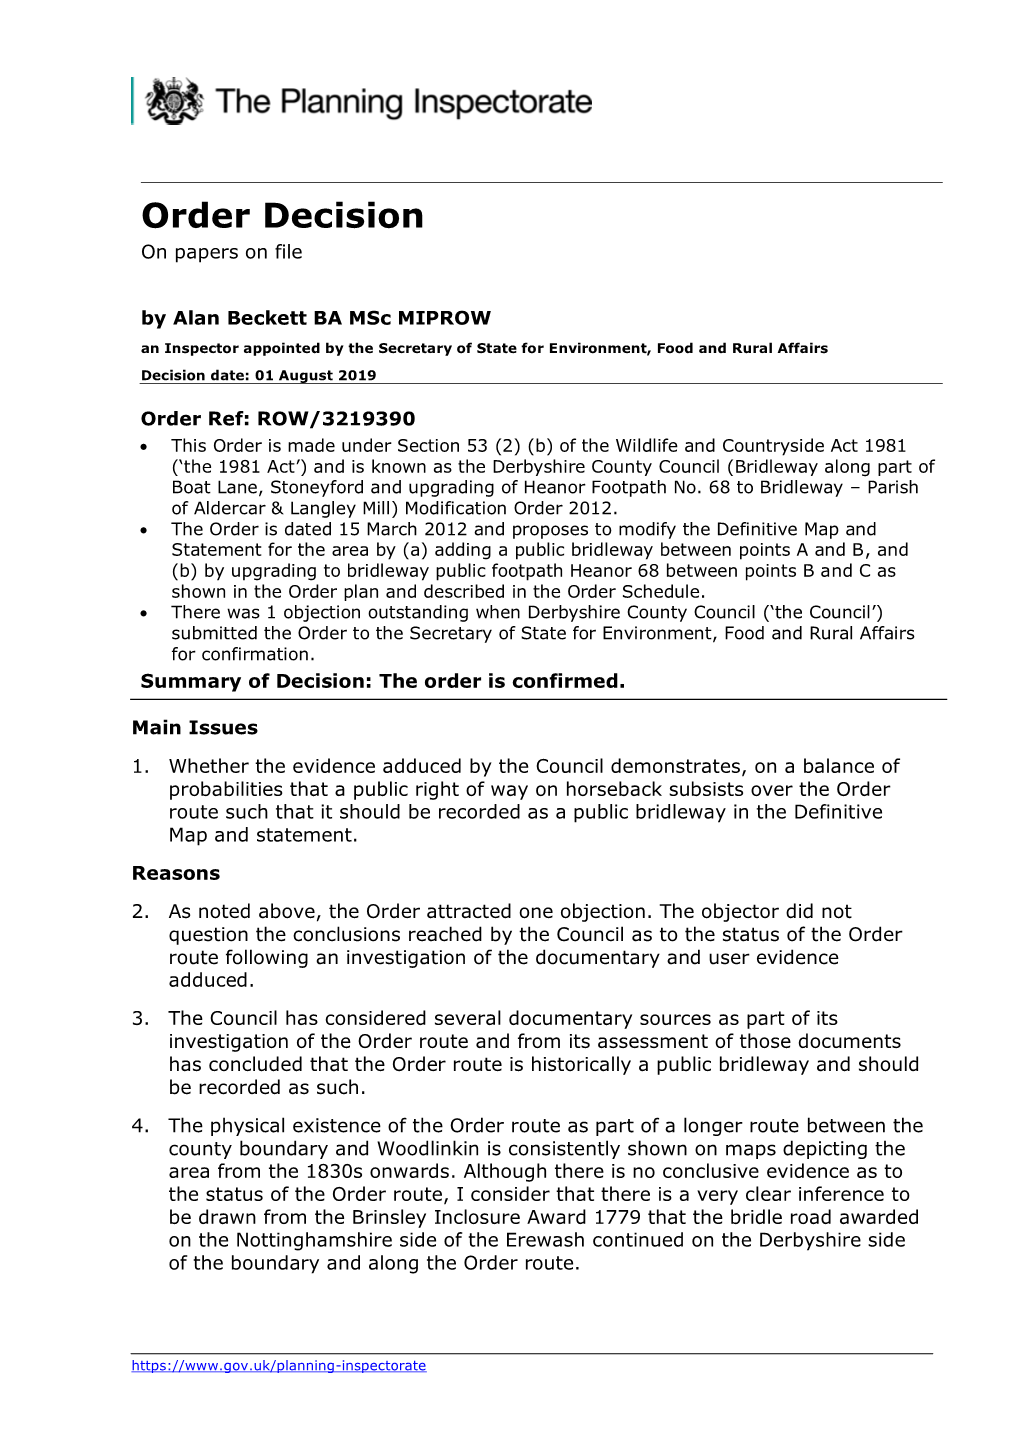 Order Decision on Papers on File